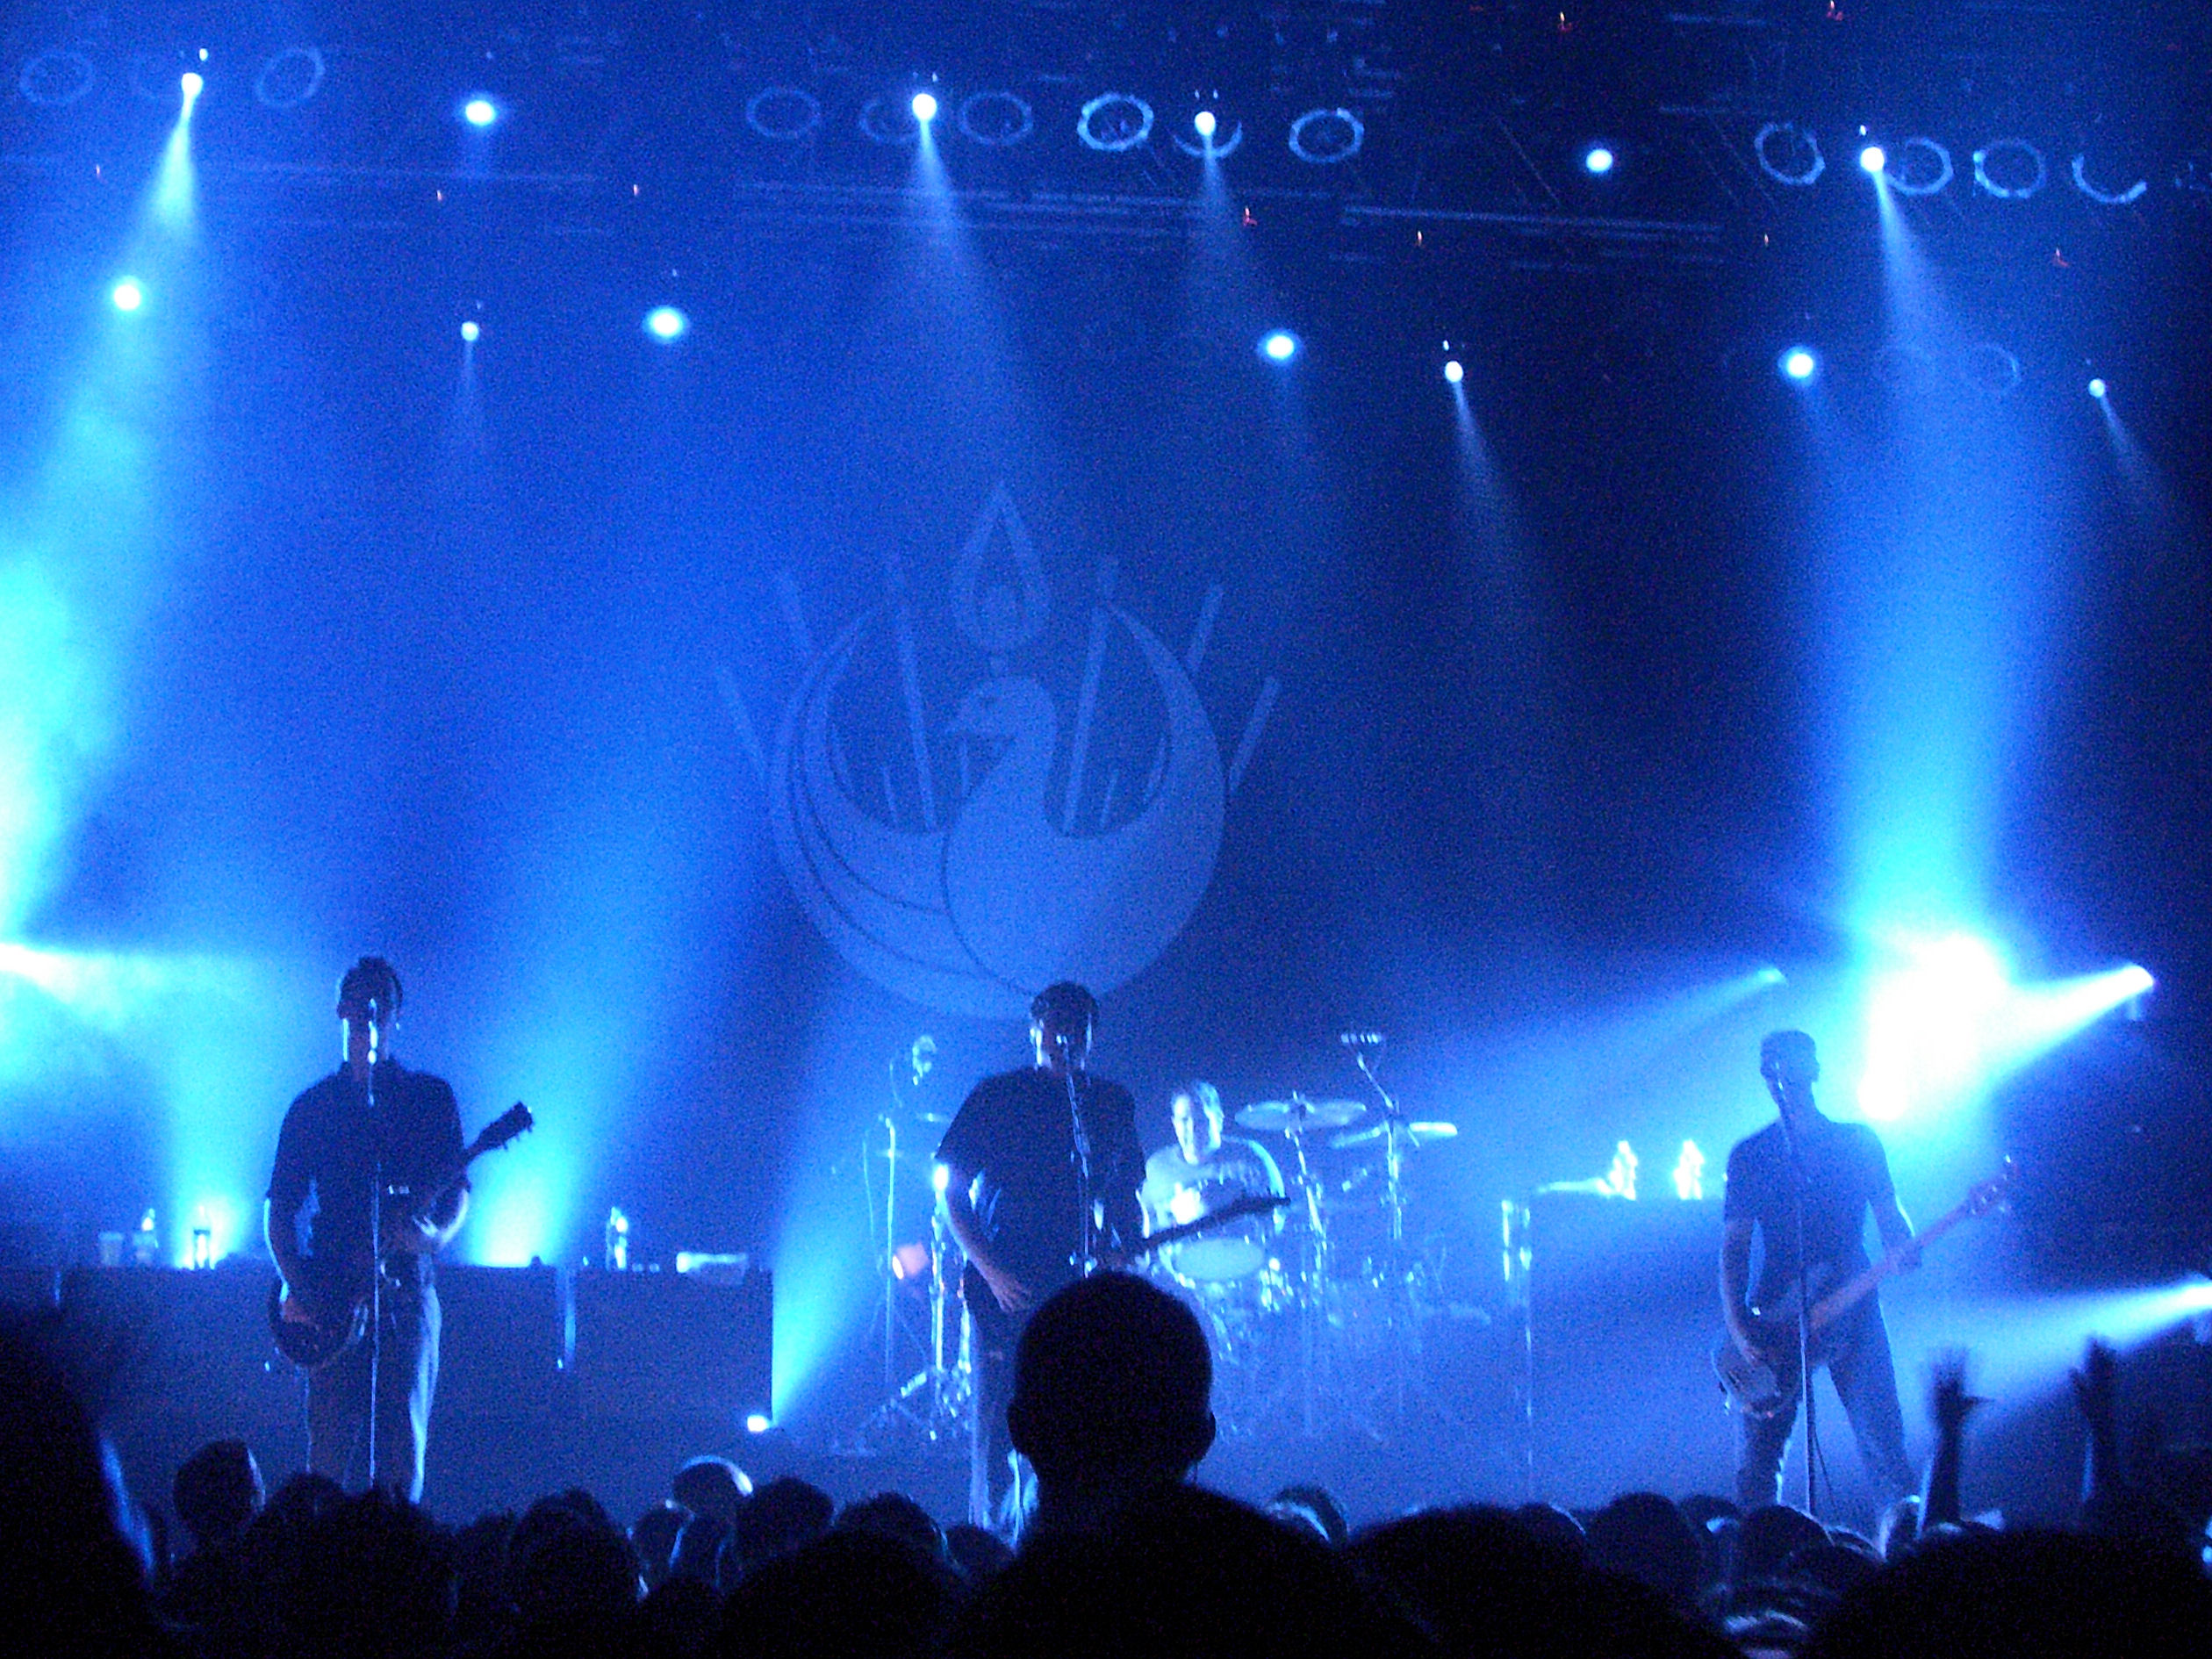 Jimmy Eat World plays at the House of Blues in Anaheim, California